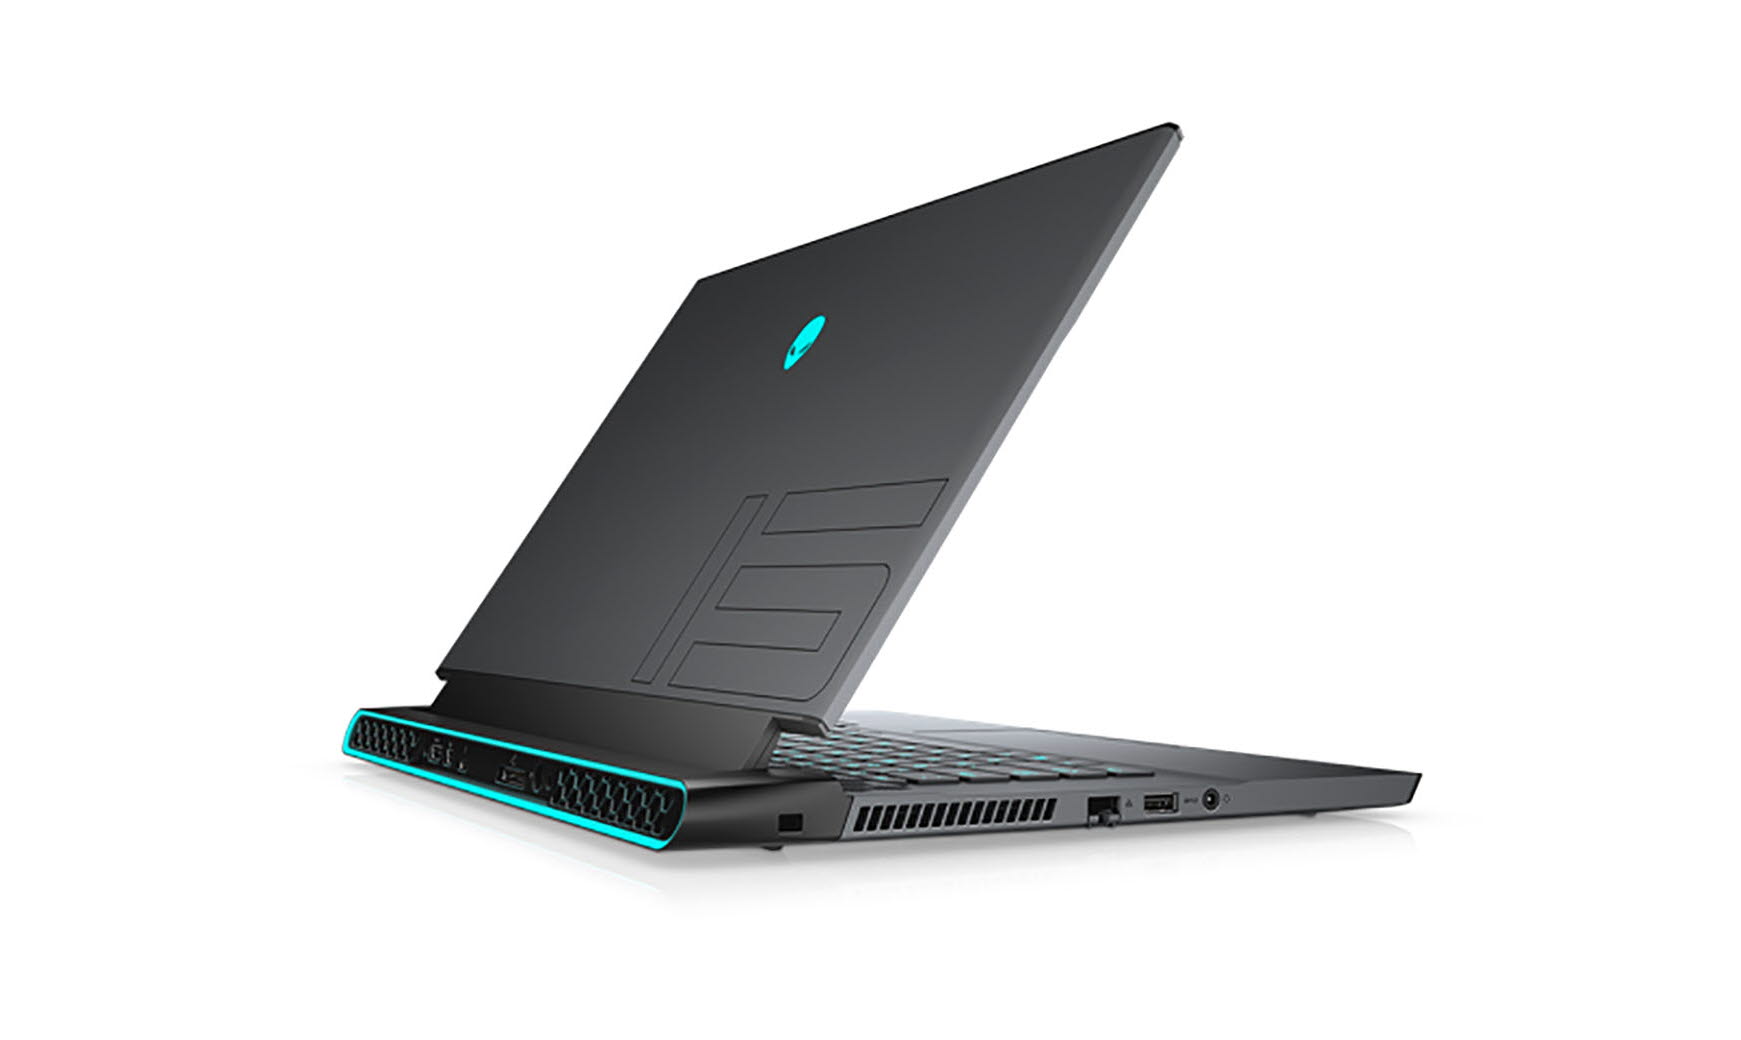 Tobii - Alienware PC with Tobii eye tracking